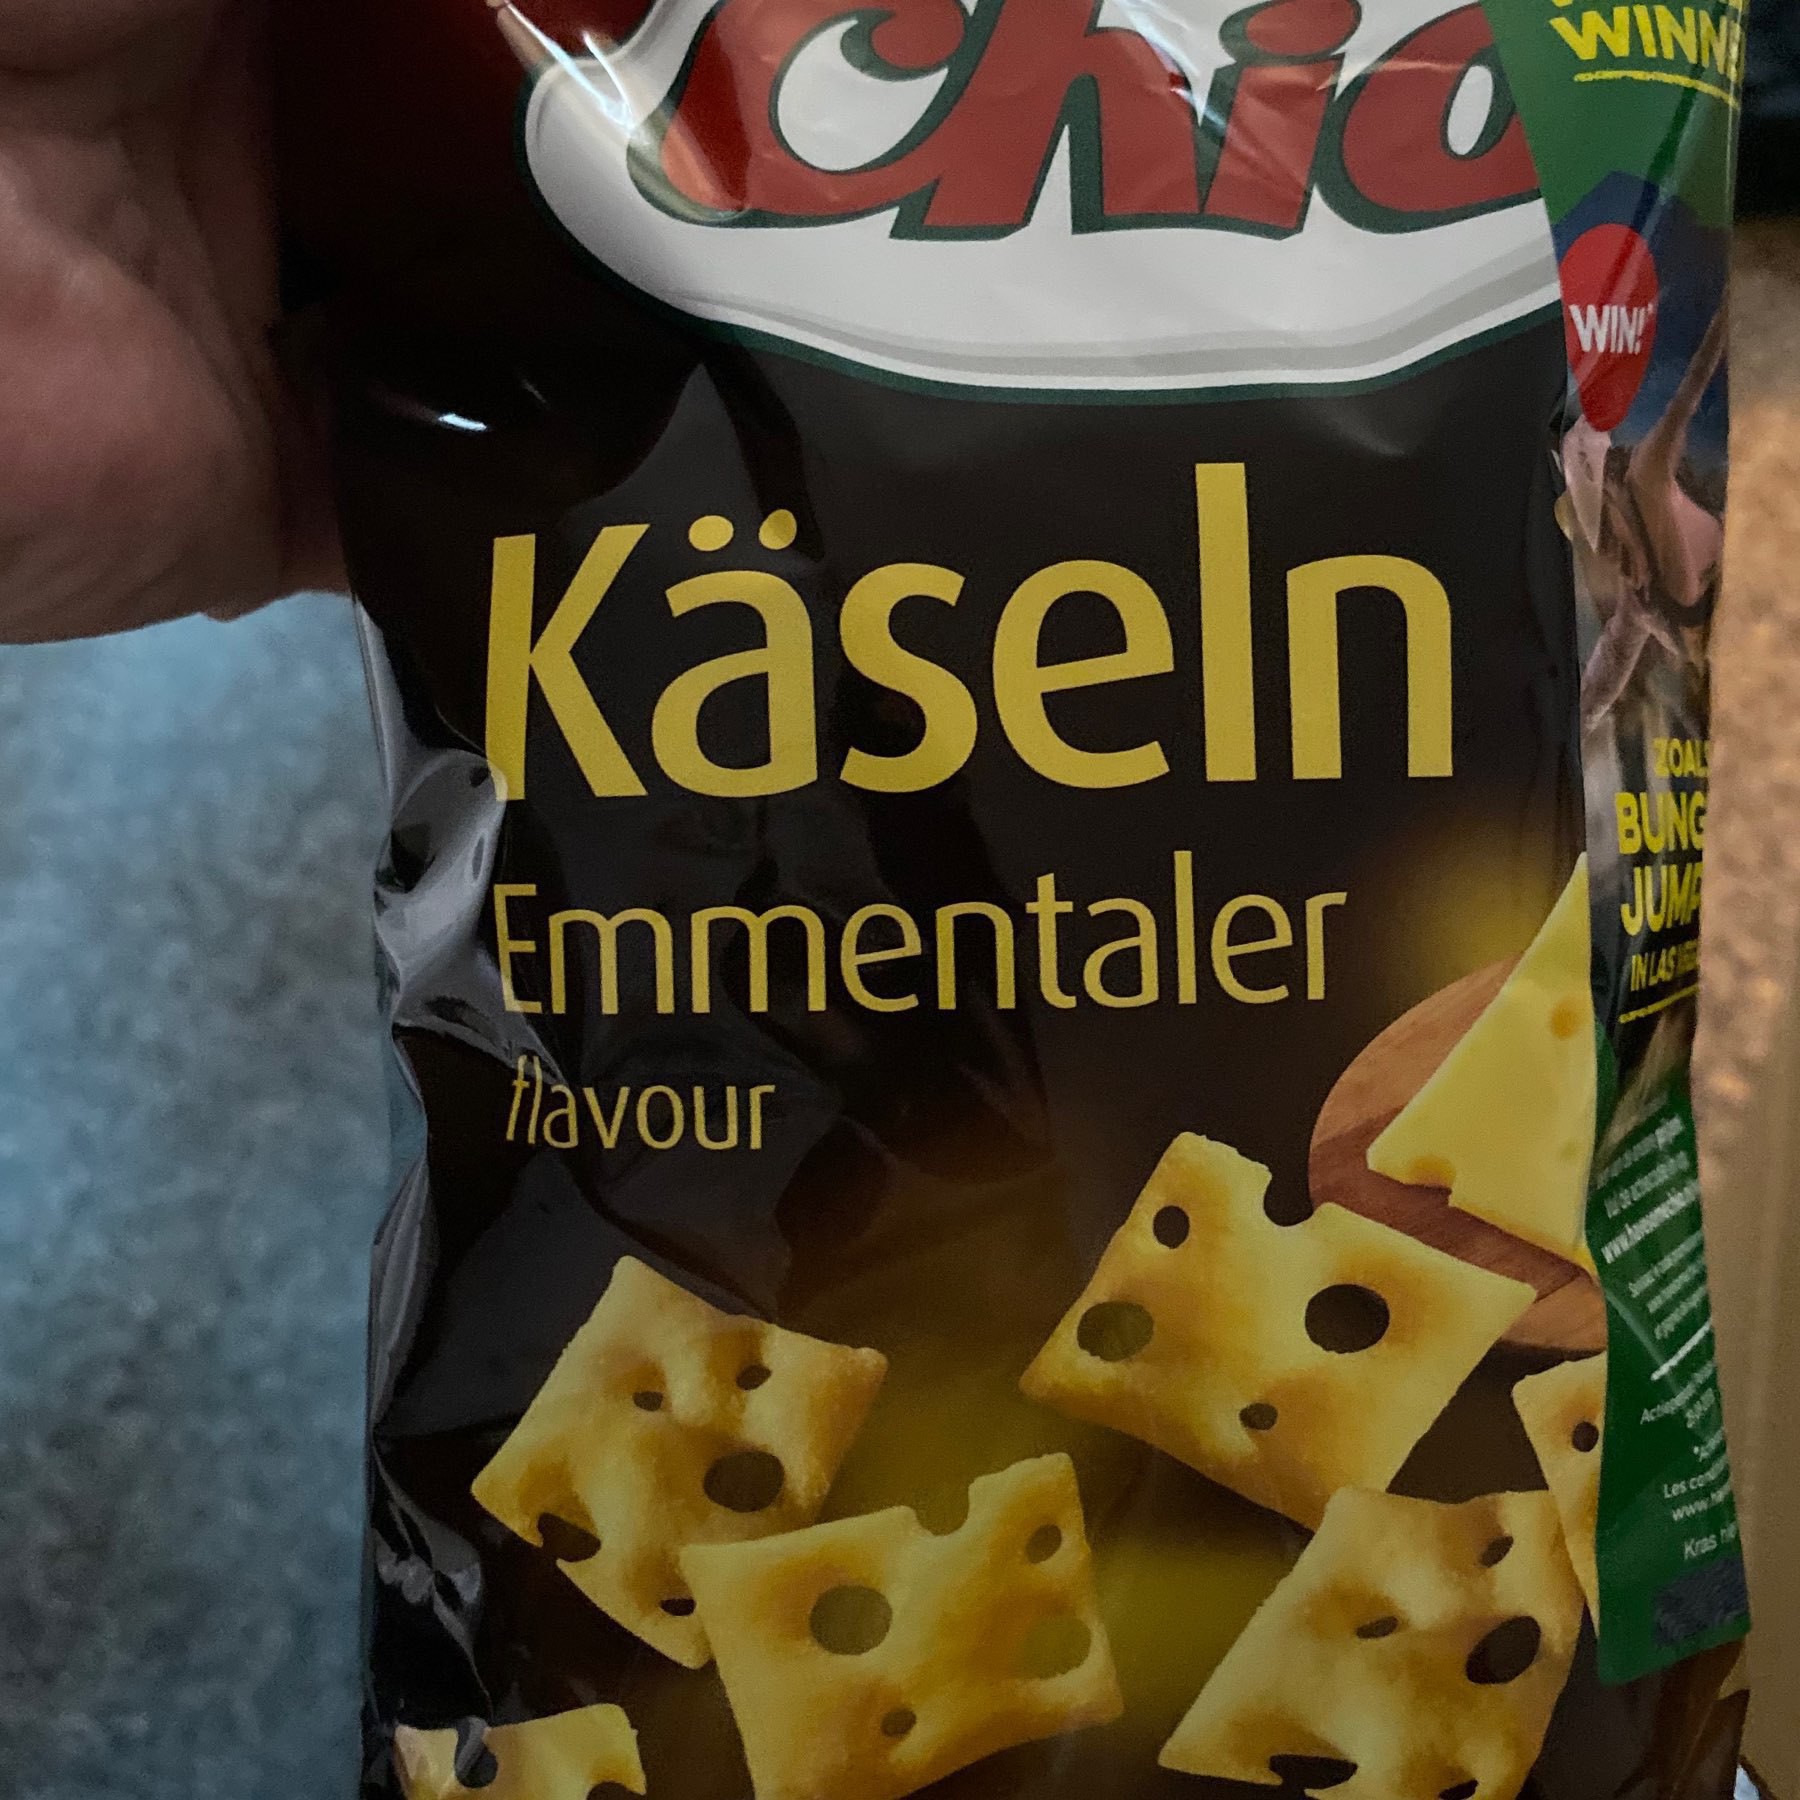 Picture of a snack bag with "Käselin Emmentaller" descriotion and crackers with swiss-cheese wtule holes.